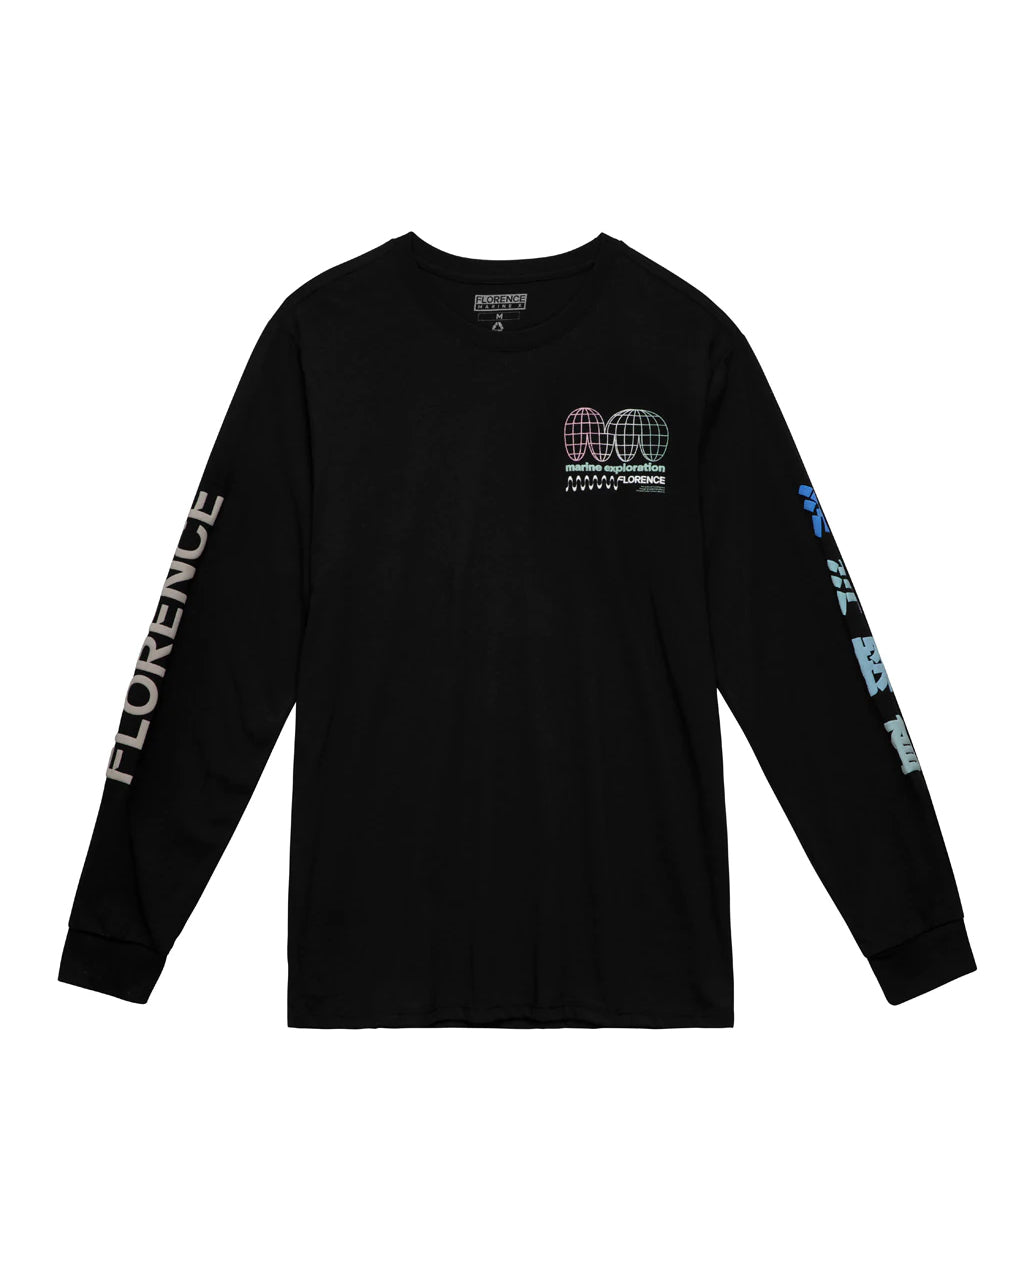 Florence Marine X Frontier Recover LS T-Shirt Black XL